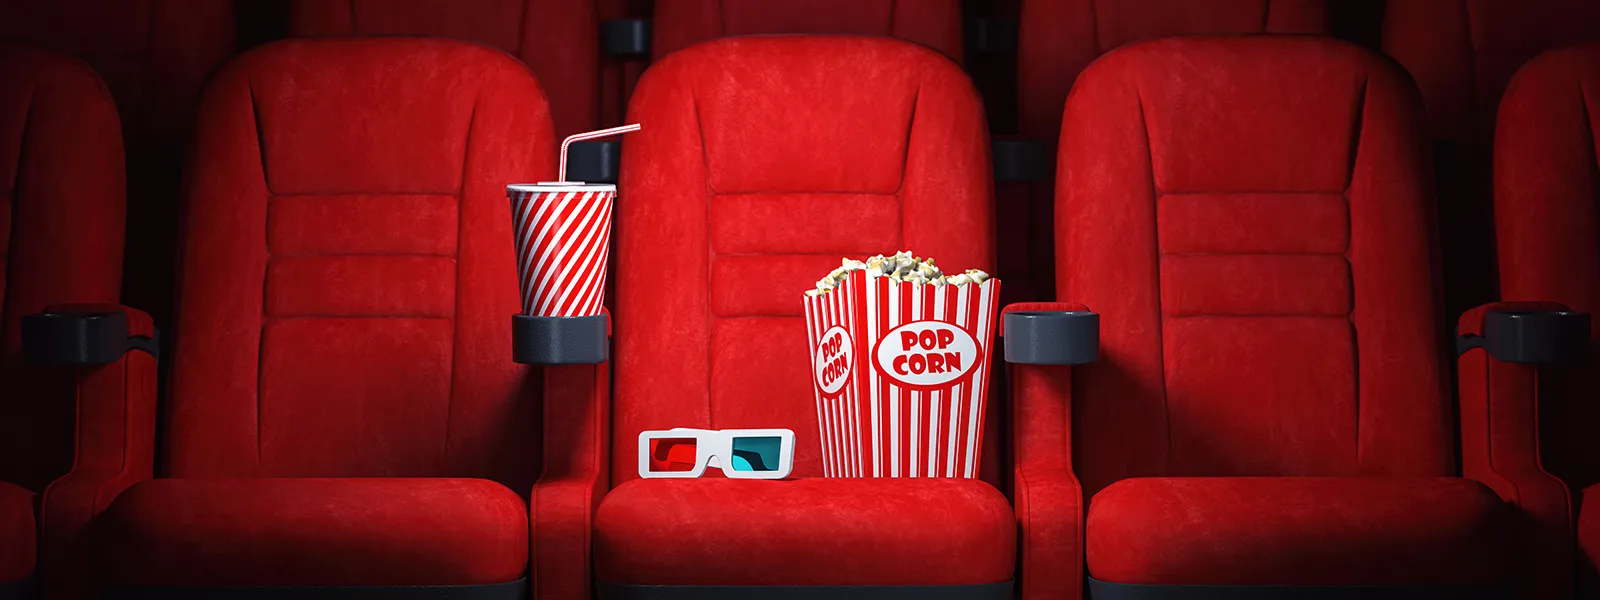 Row of theater seats with one seat containing a box of popcorn, 3D glasses, and a drink.